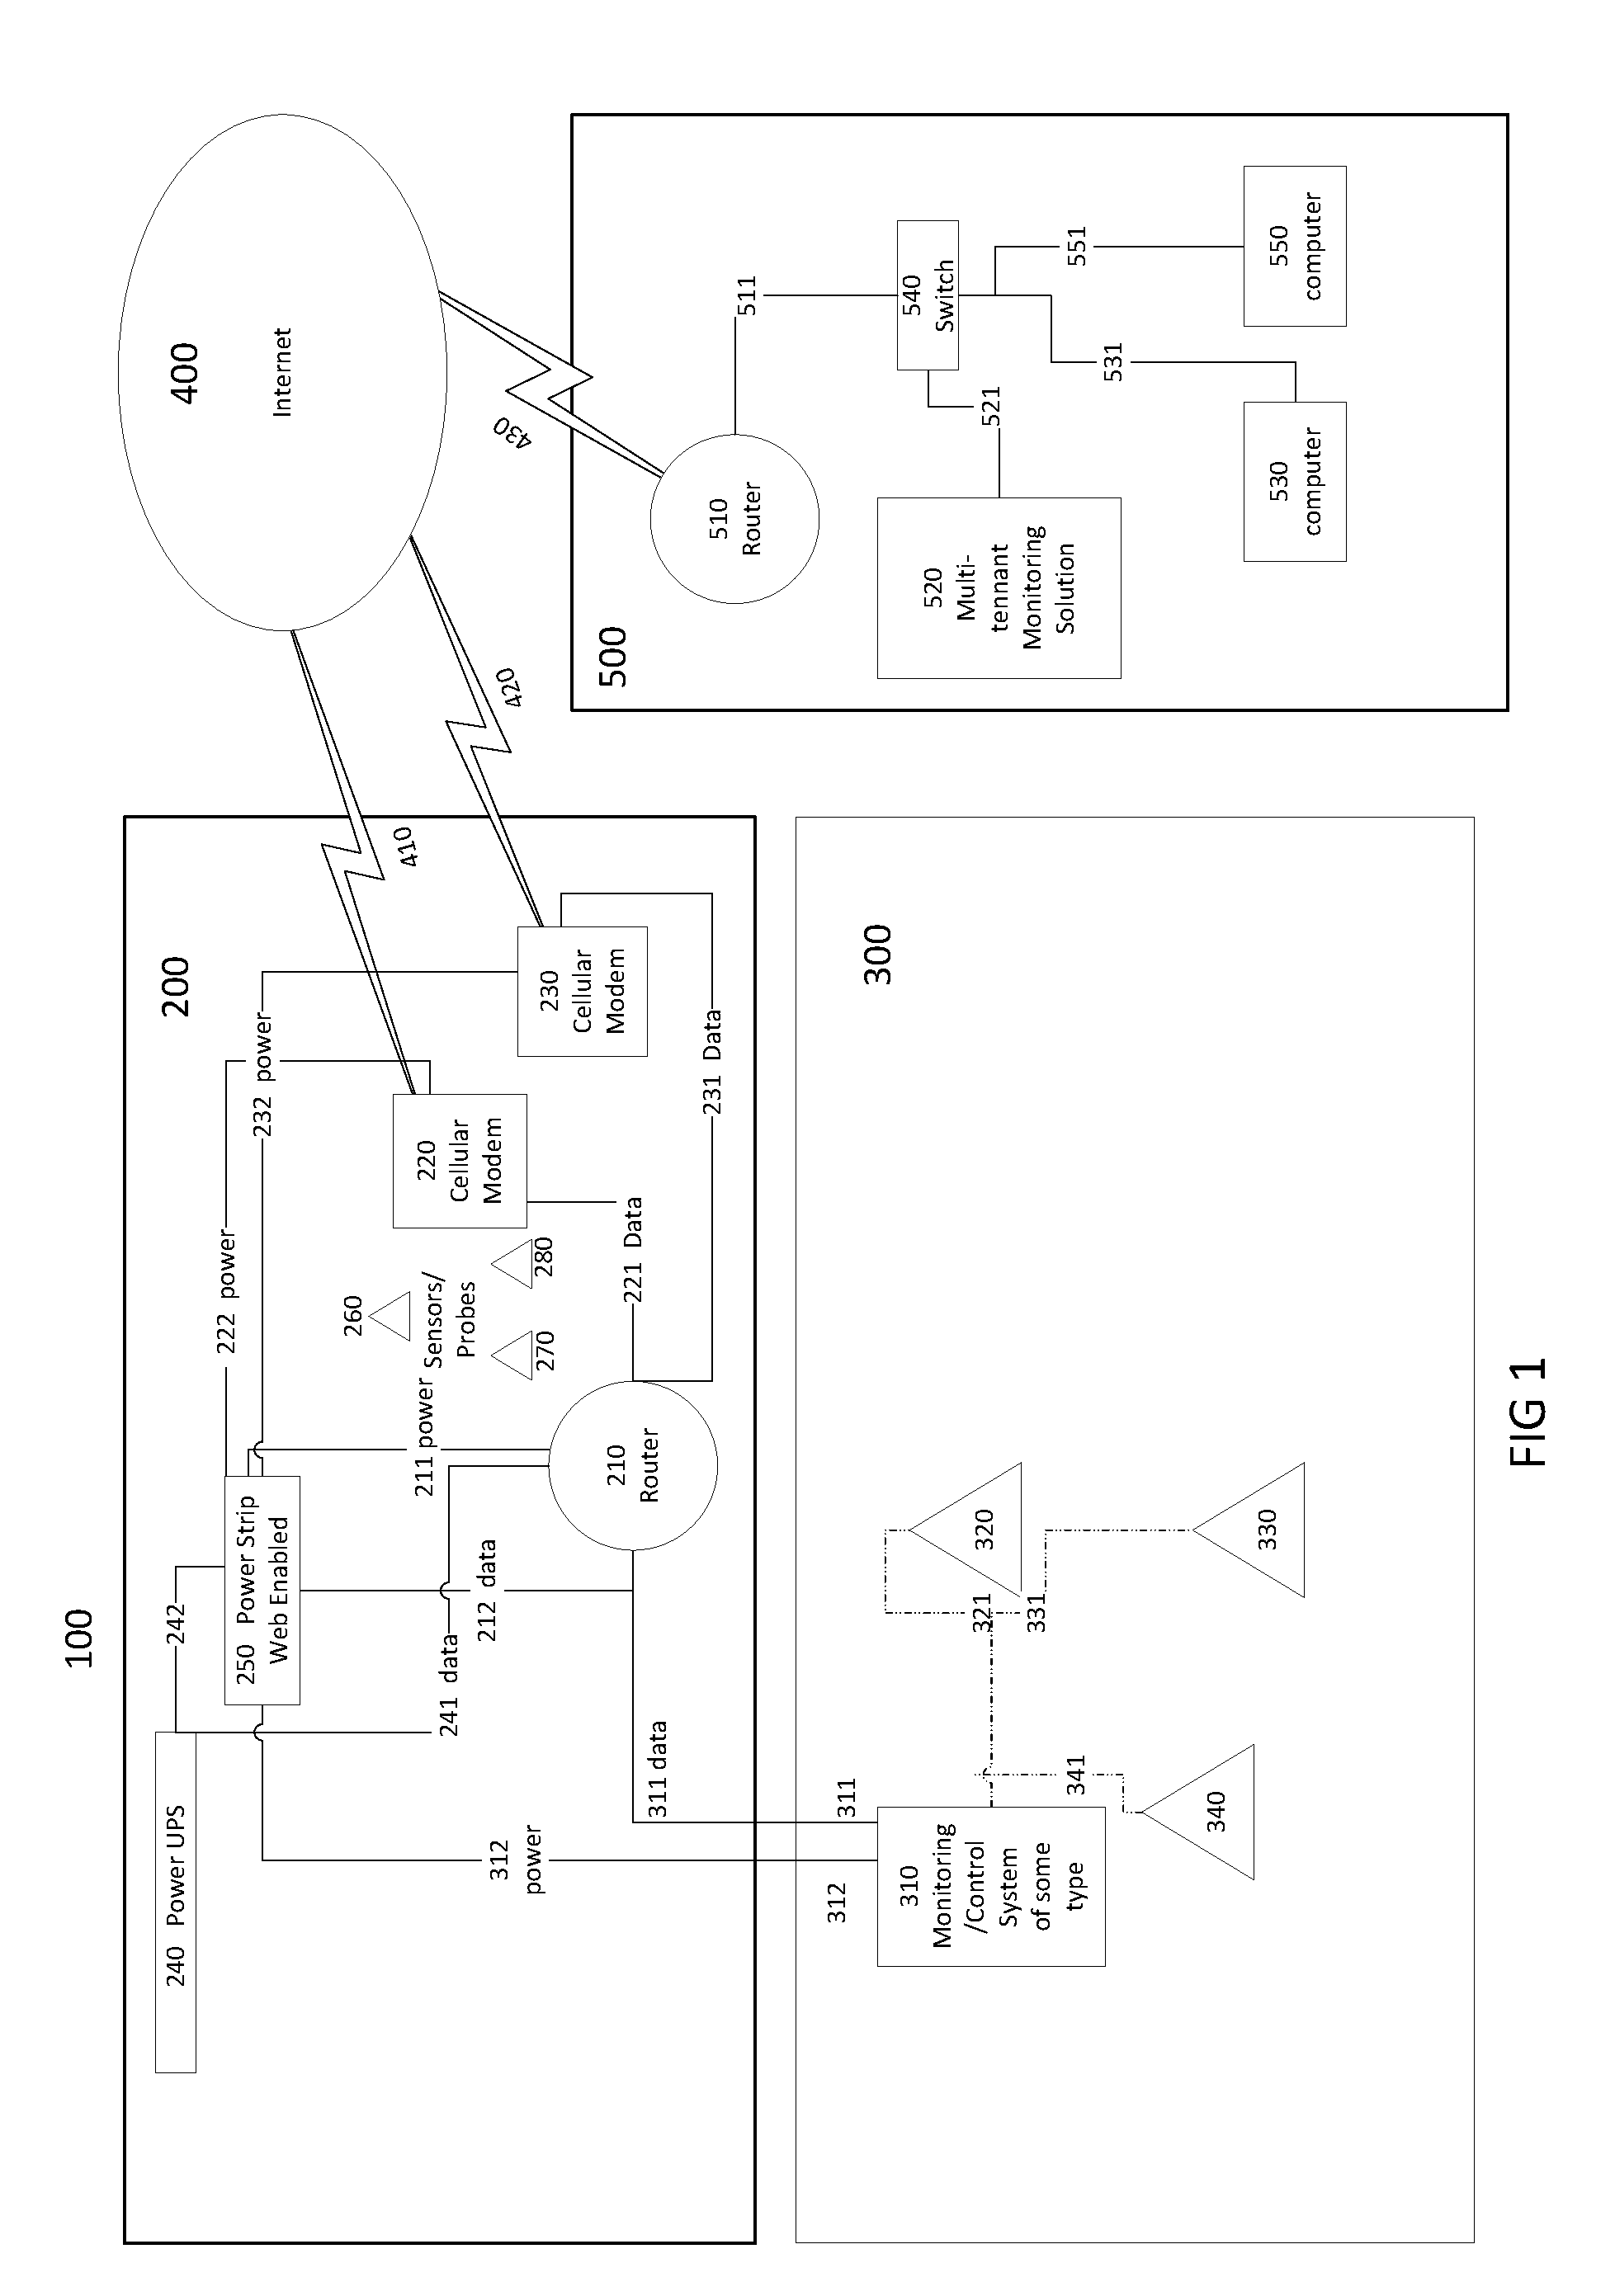 Remotely deployable inverse proactive status monitoring and reporting system and method of use